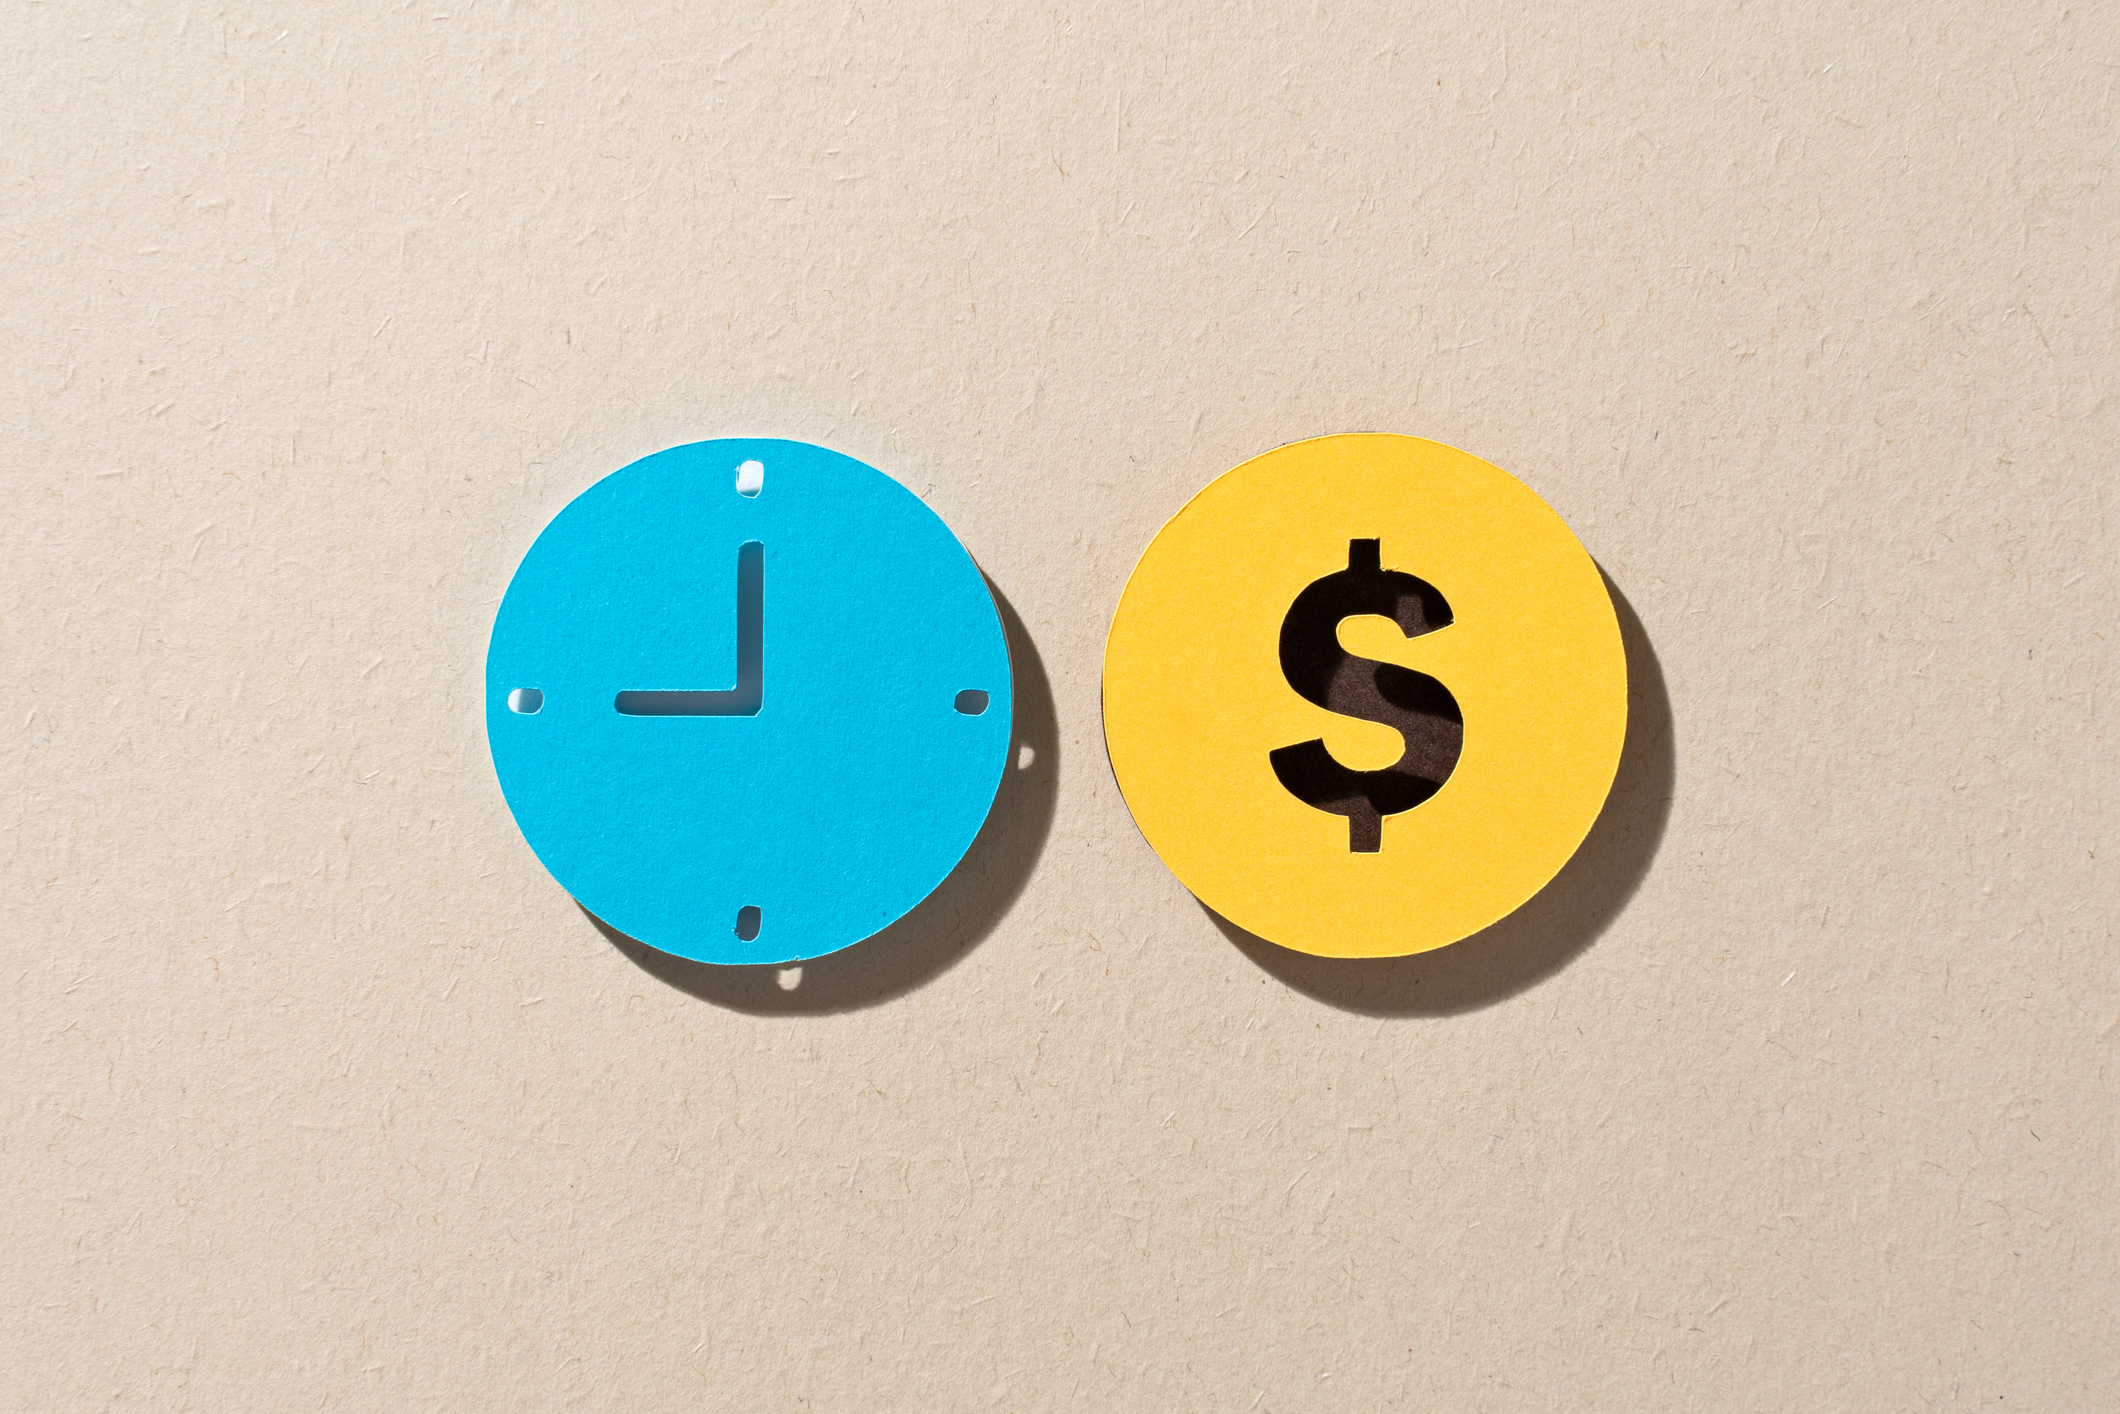 Clock and dollar sign for tax payment deadline